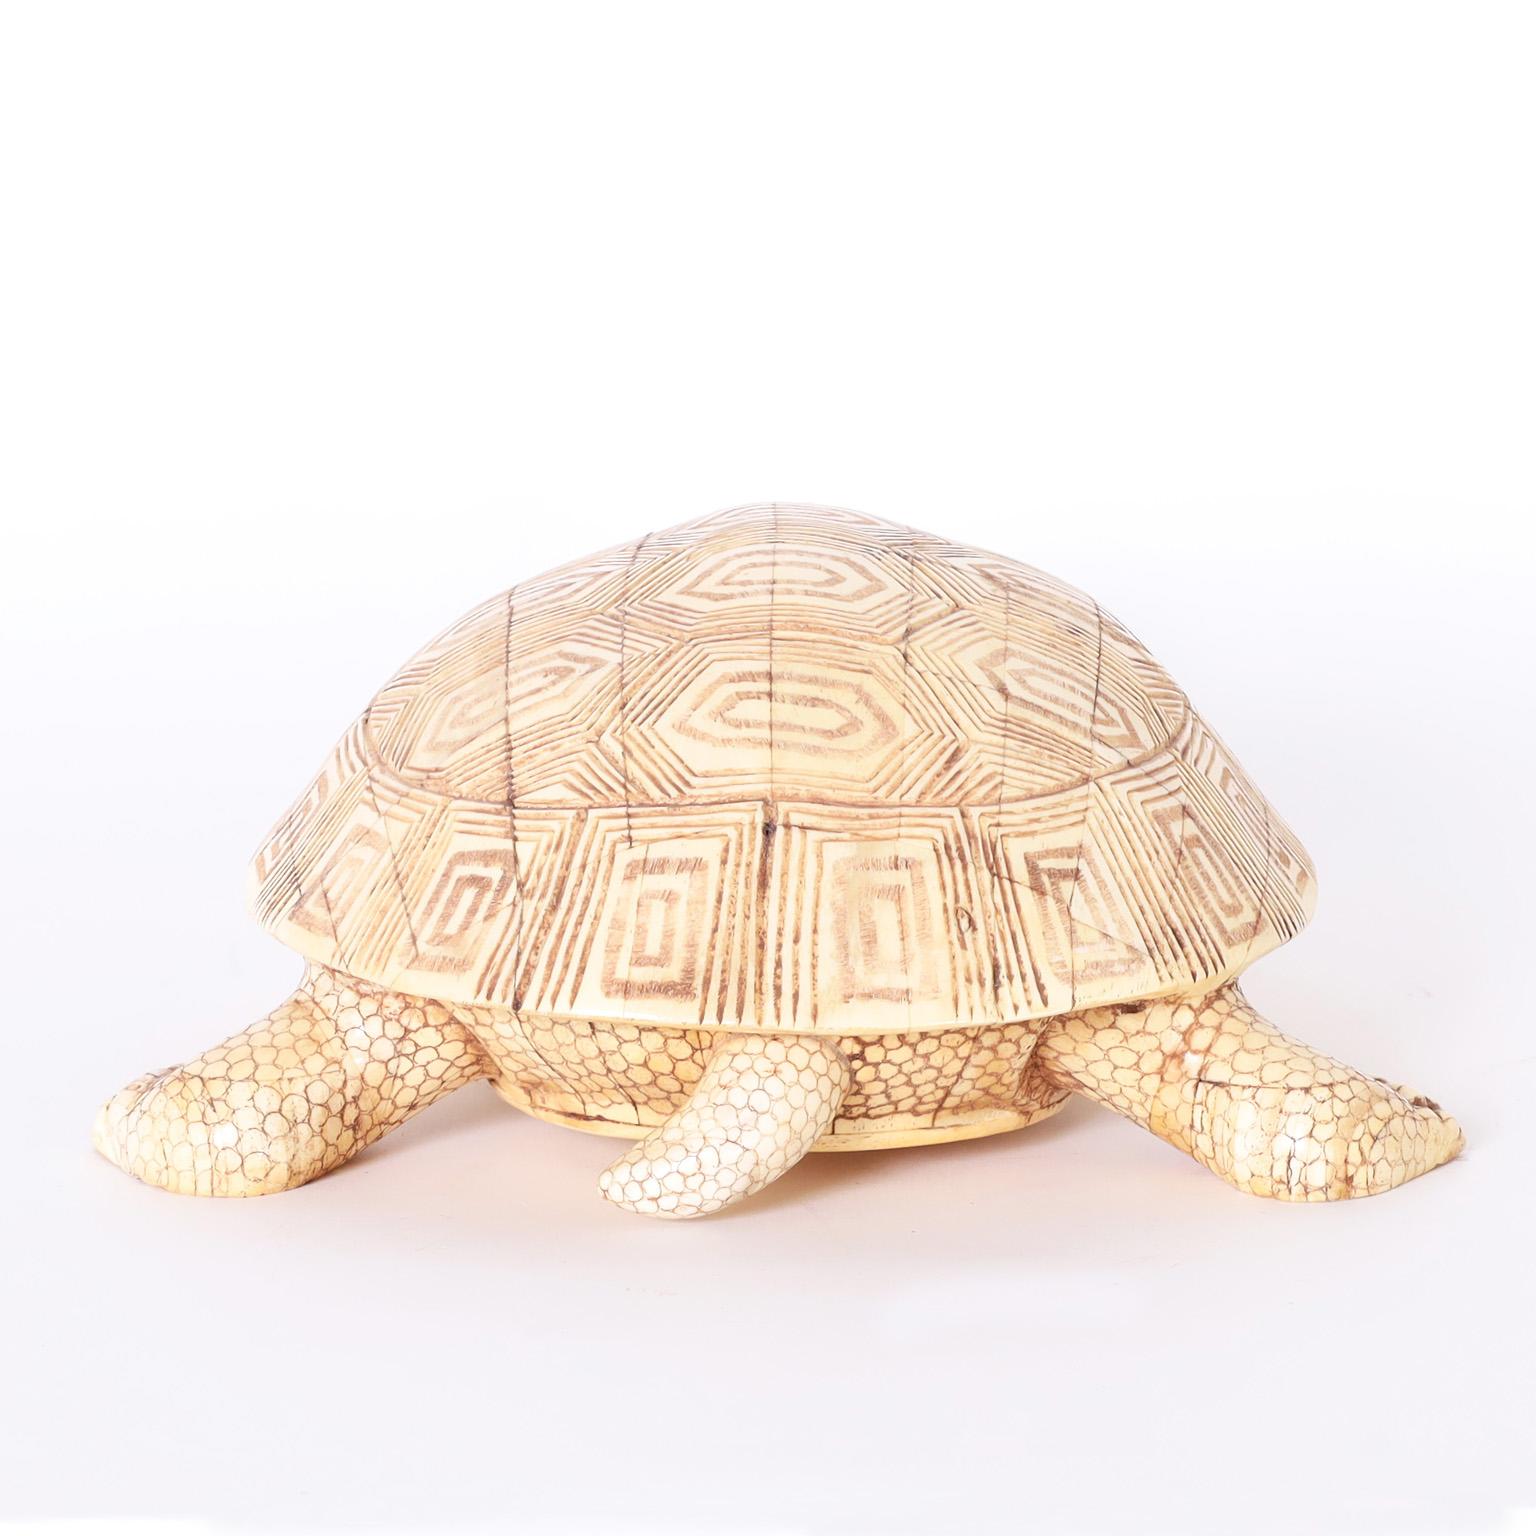 Chinese Export Carved Bone Turtle For Sale